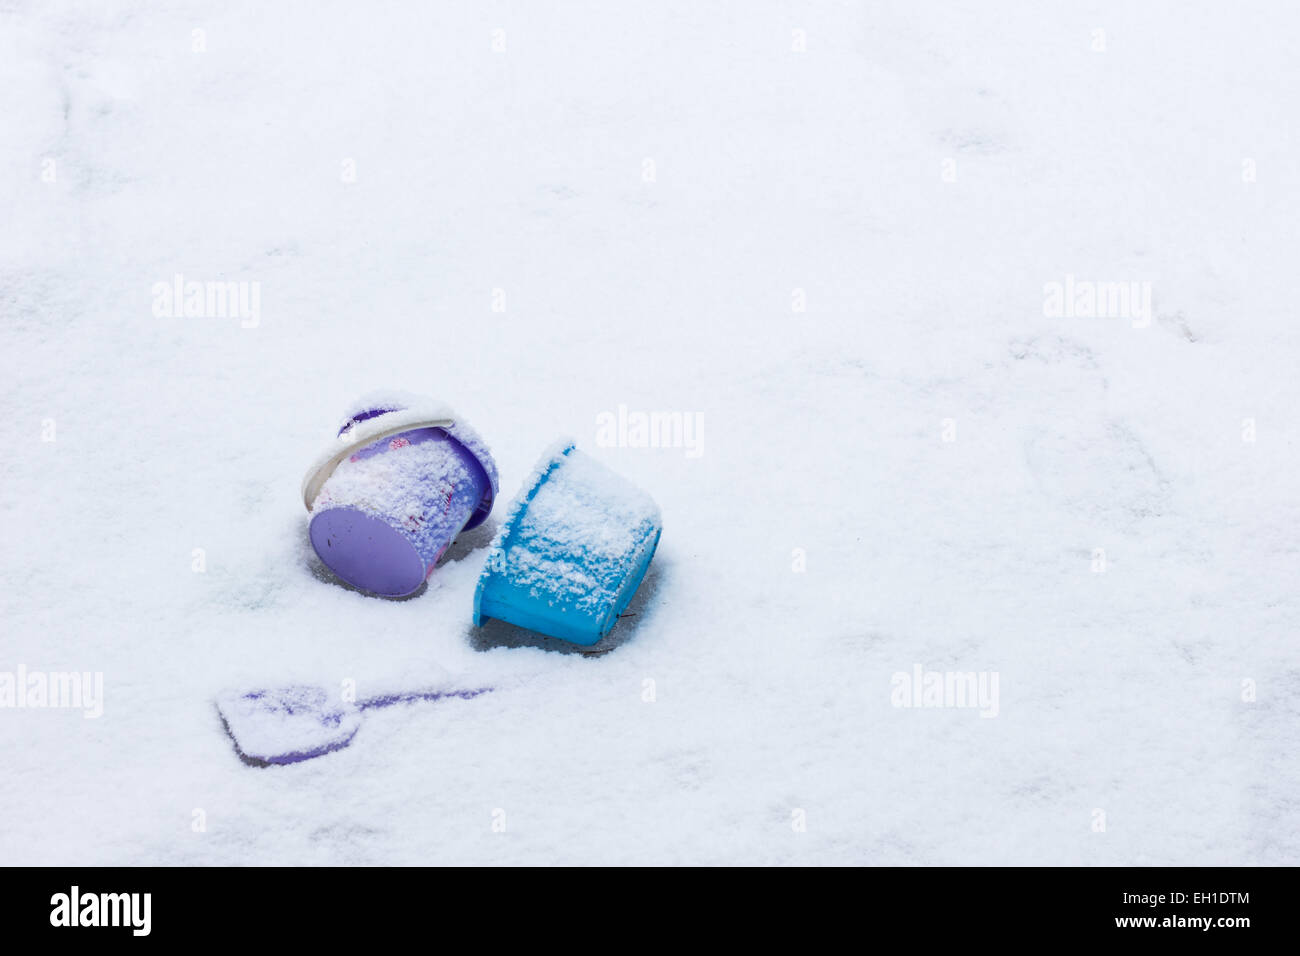 Children's toys left behind on a snowy ground, copy space. Stock Photo